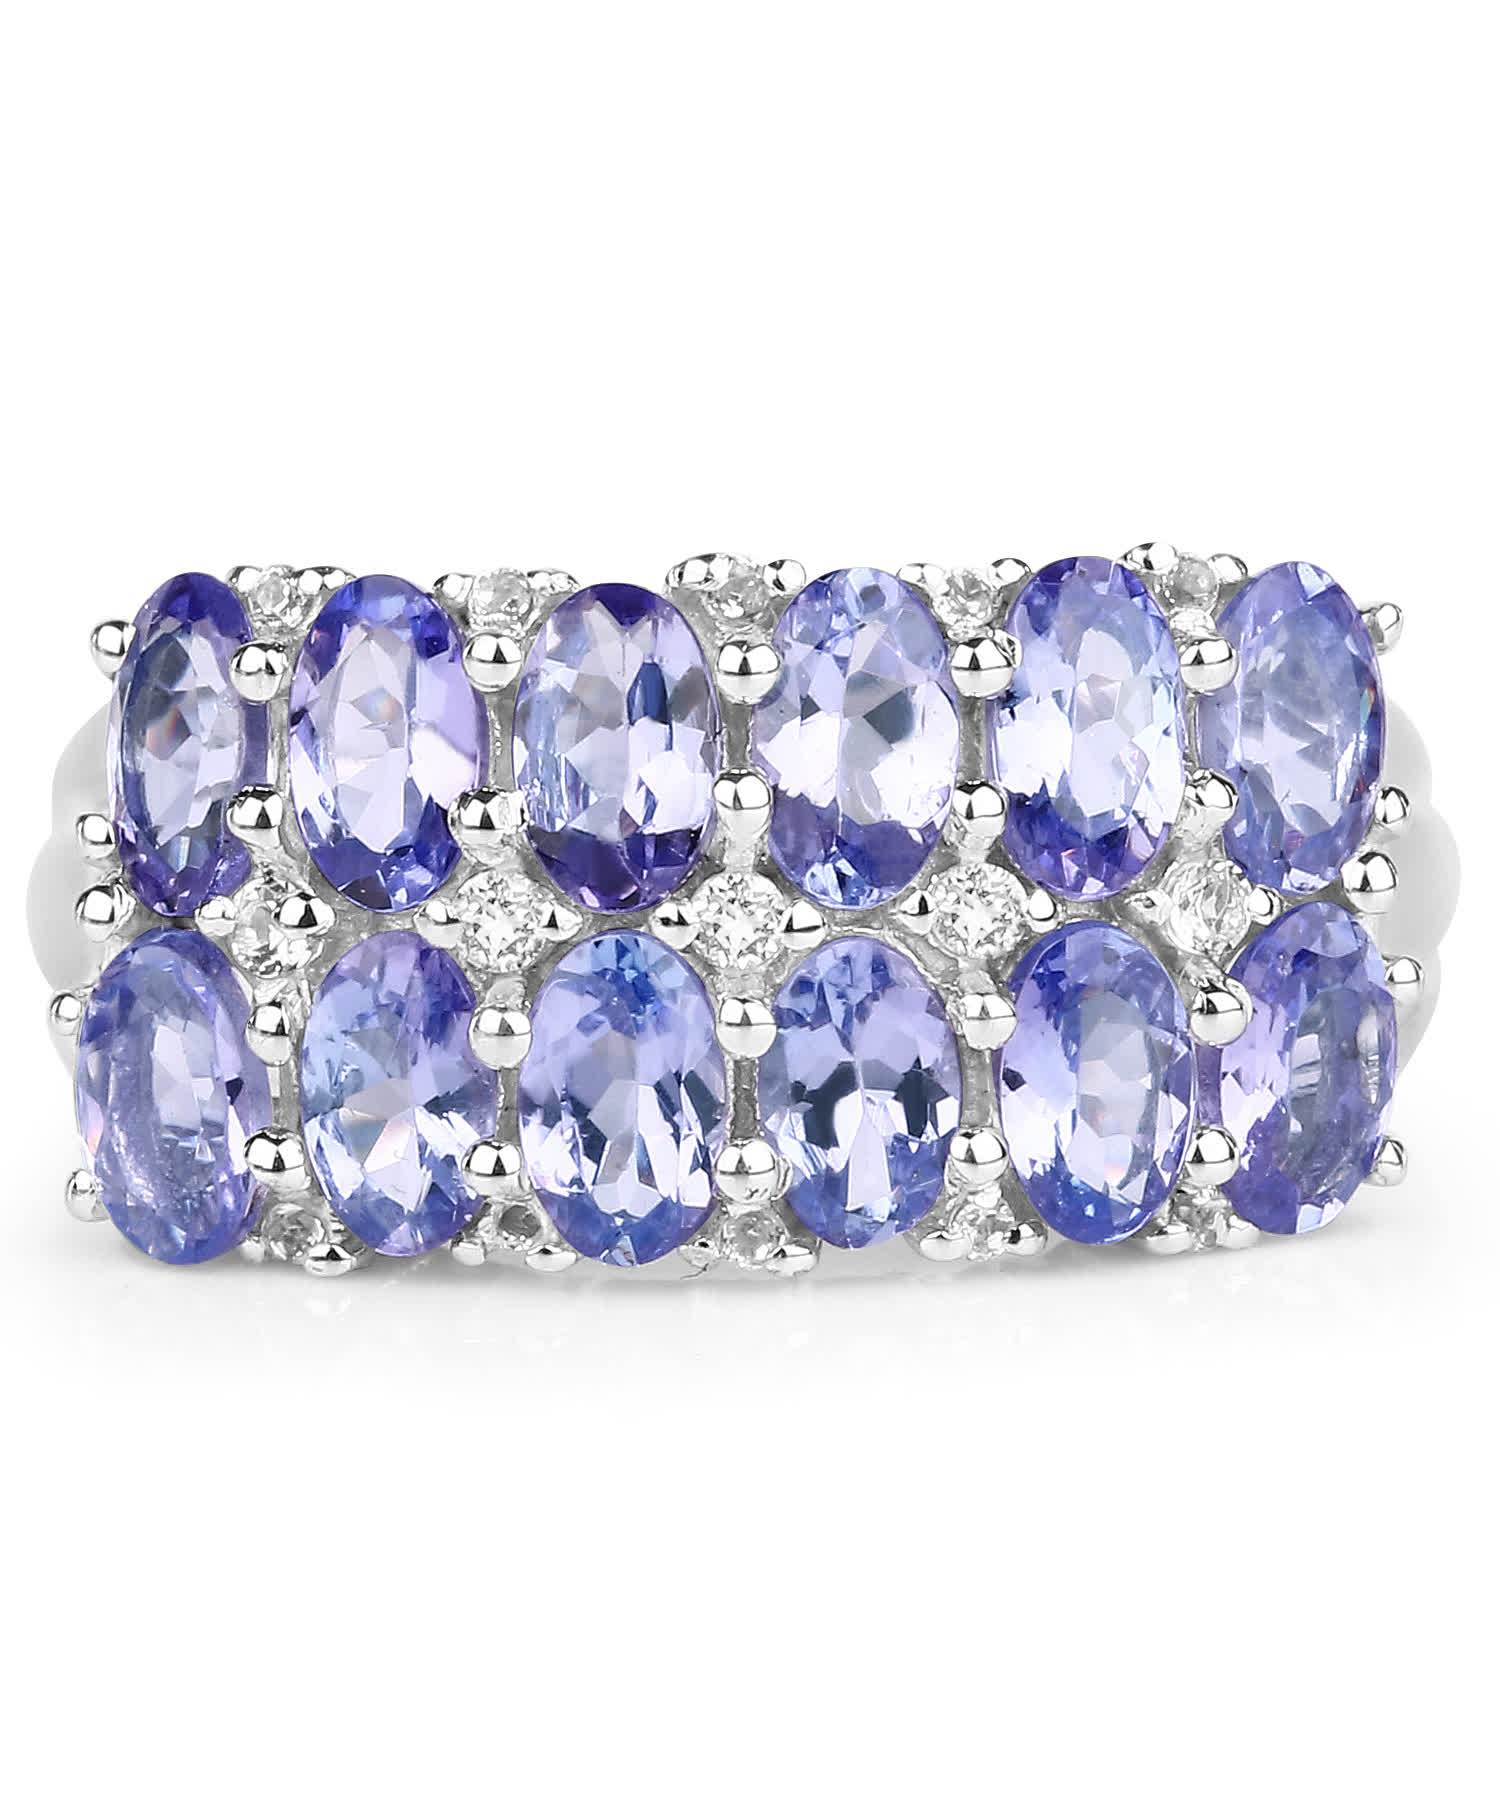 3.16ctw Natural Tanzanite and Topaz Rhodium Plated 925 Sterling Silver Right Hand Ring View 3